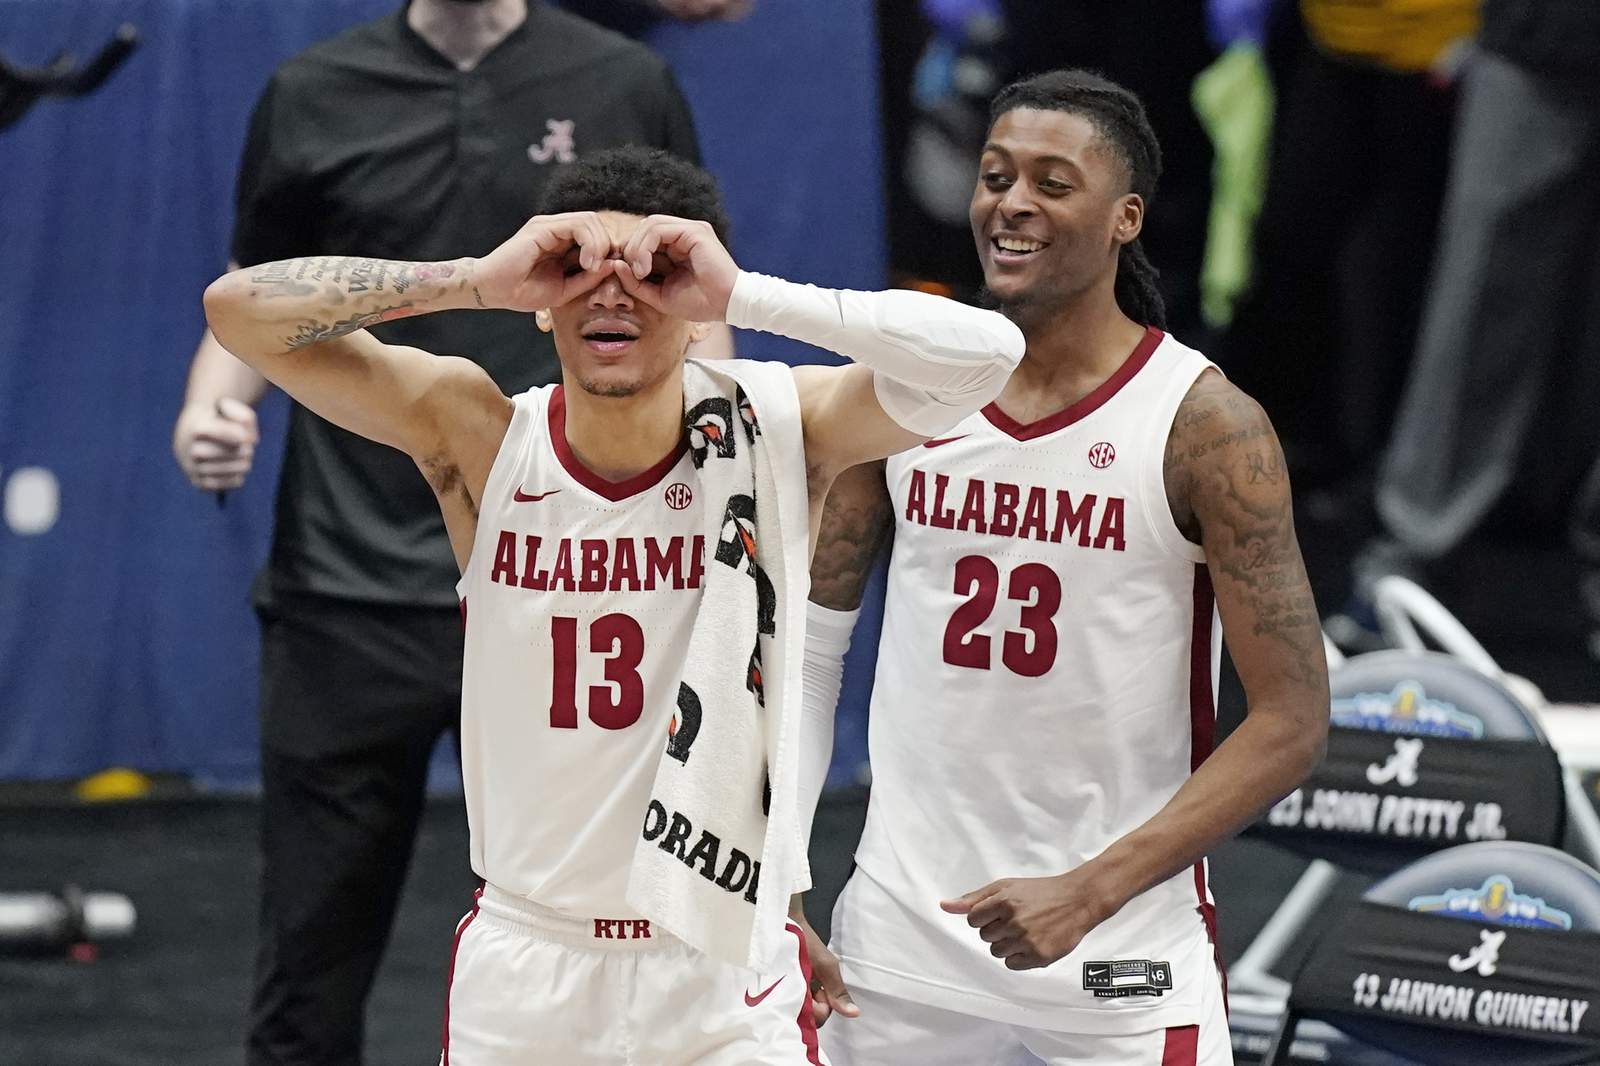 Alabama blows out Mississippi State 85-48 in SEC quarters